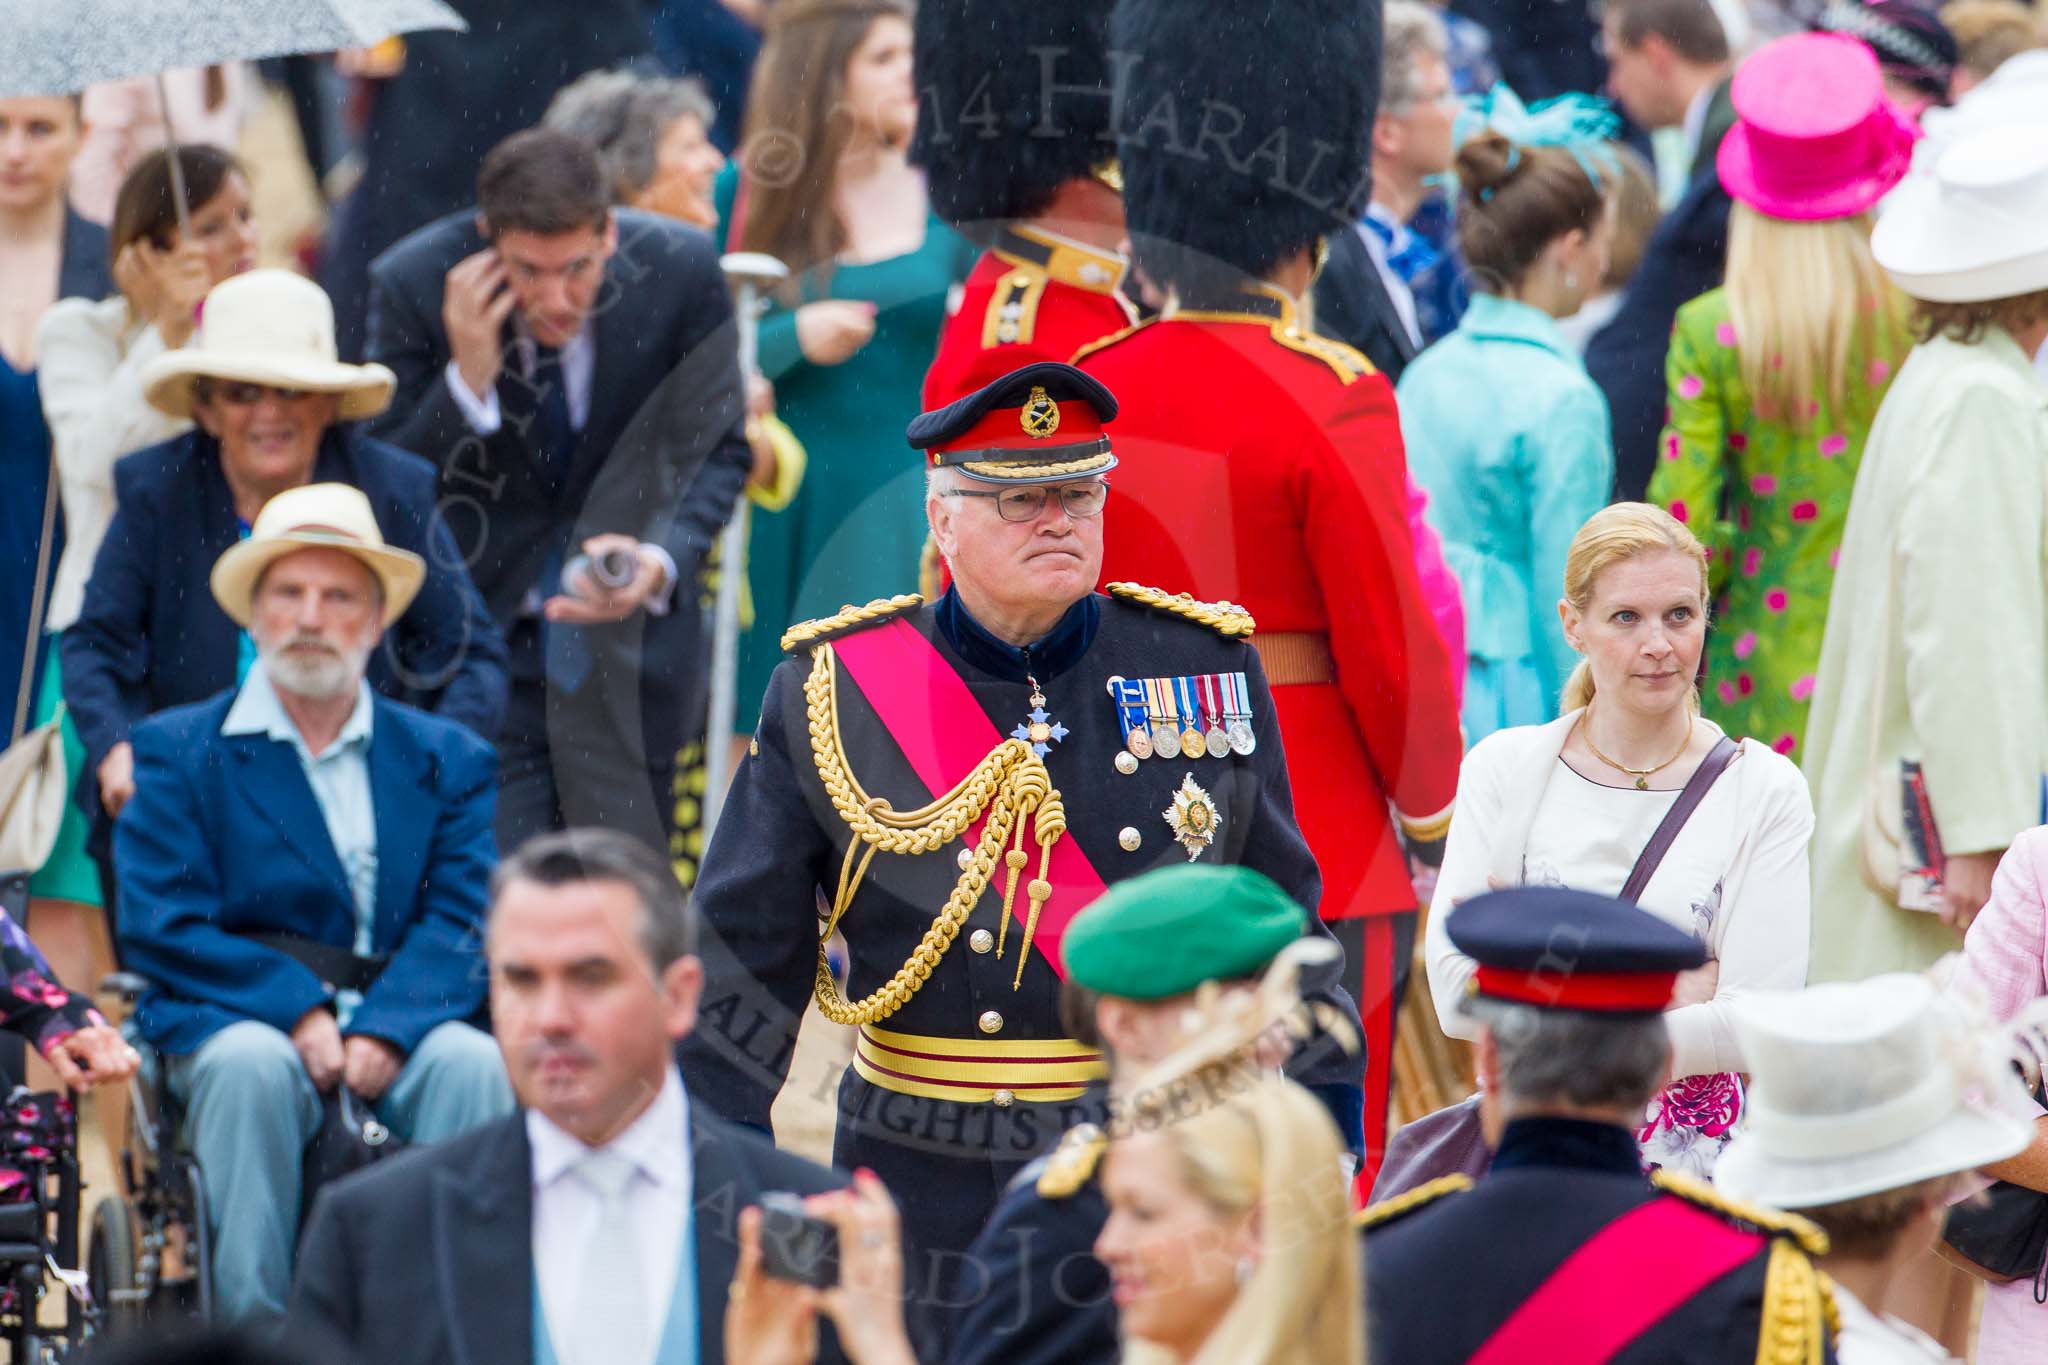 Trooping the Colour 2014.
Horse Guards Parade, Westminster,
London SW1A,

United Kingdom,
on 14 June 2014 at 12:21, image #937